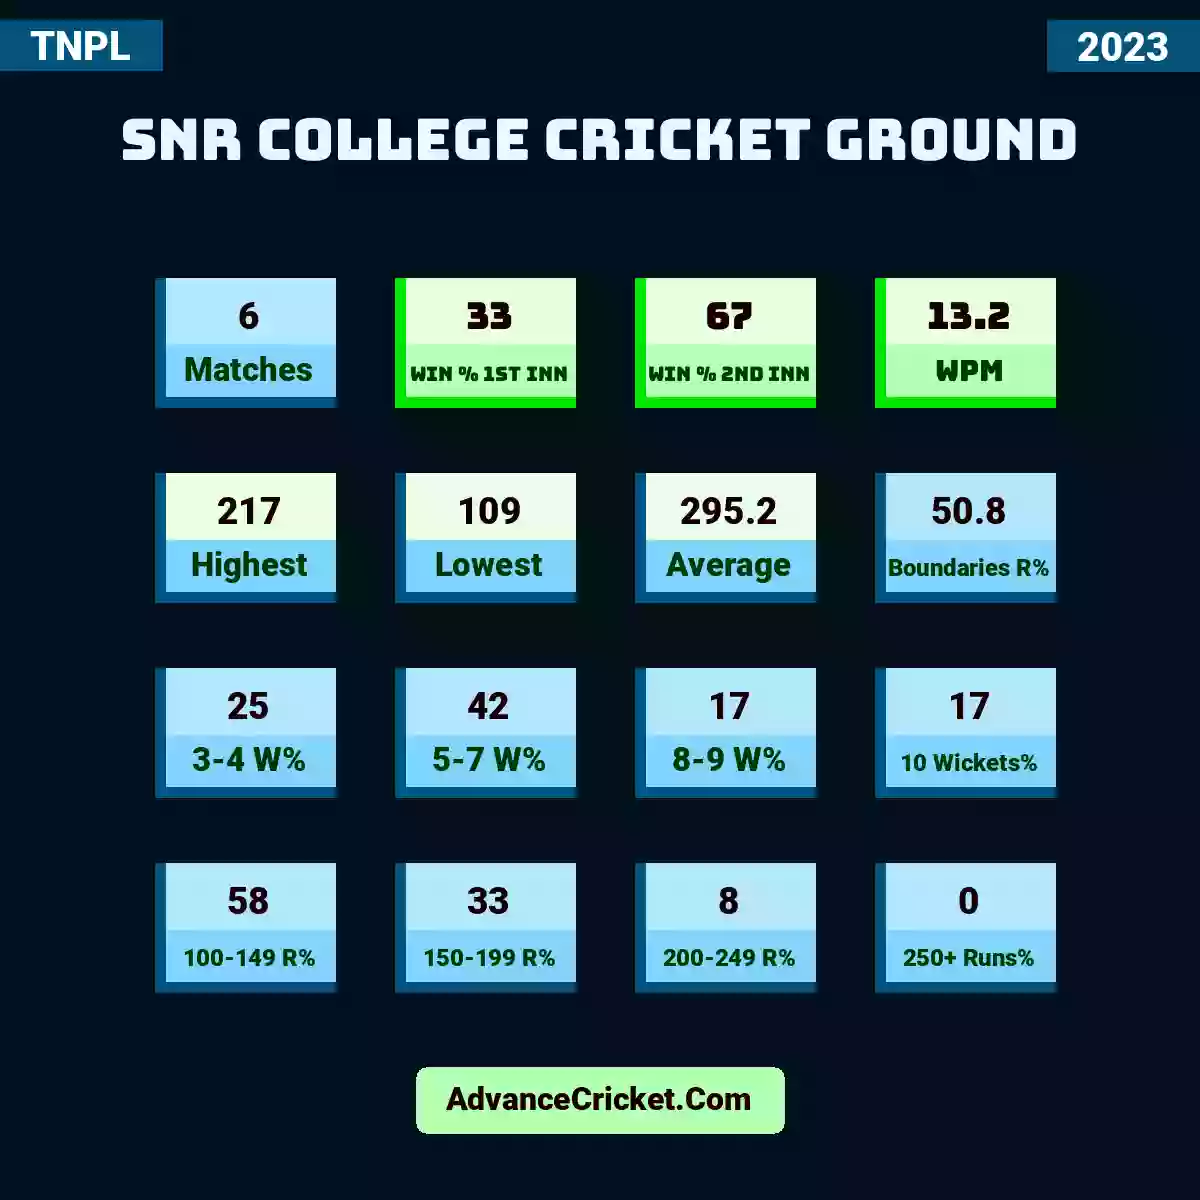 Image showing SNR College Cricket Ground with Matches: 6, Win % 1st Inn: 33, Win % 2nd Inn: 67, WPM: 13.2, Highest: 217, Lowest: 109, Average: 295.2, Boundaries R%: 50.8, 3-4 W%: 25, 5-7 W%: 42, 8-9 W%: 17, 10 Wickets%: 17, 100-149 R%: 58, 150-199 R%: 33, 200-249 R%: 8, 250+ Runs%: 0.